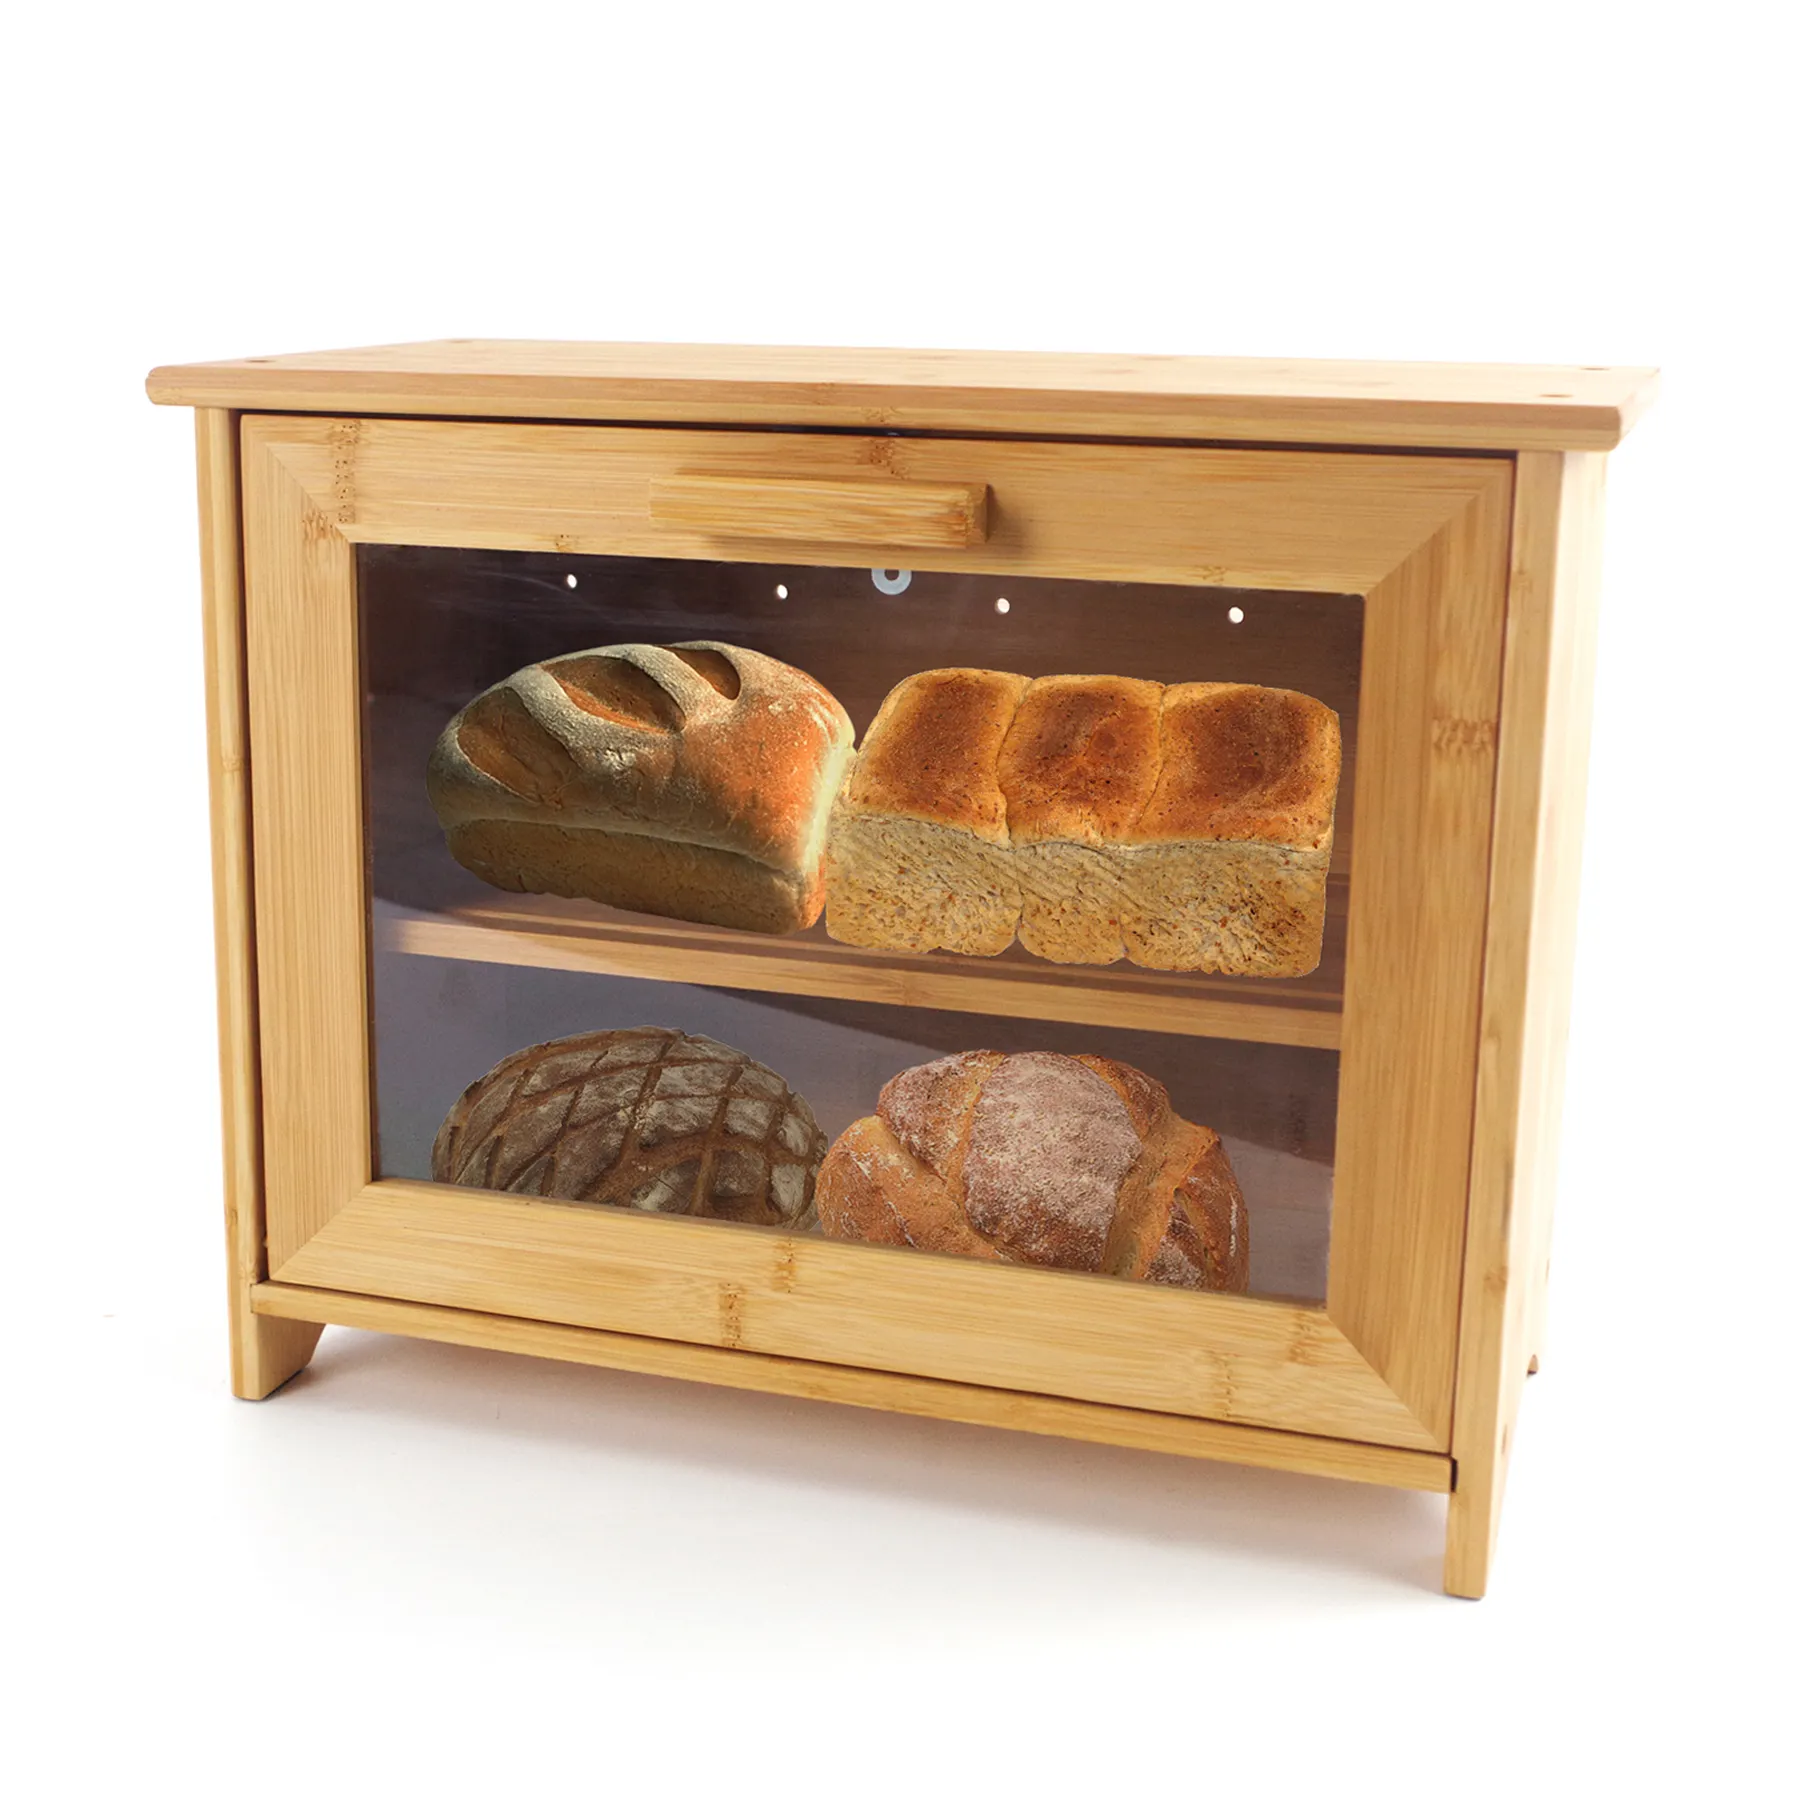 Bread Box Storage Box Bread Holder Kitchen Extra Large Double Layer Bamboo With Clear Front Window Farmhouse Style Bamboo Charge